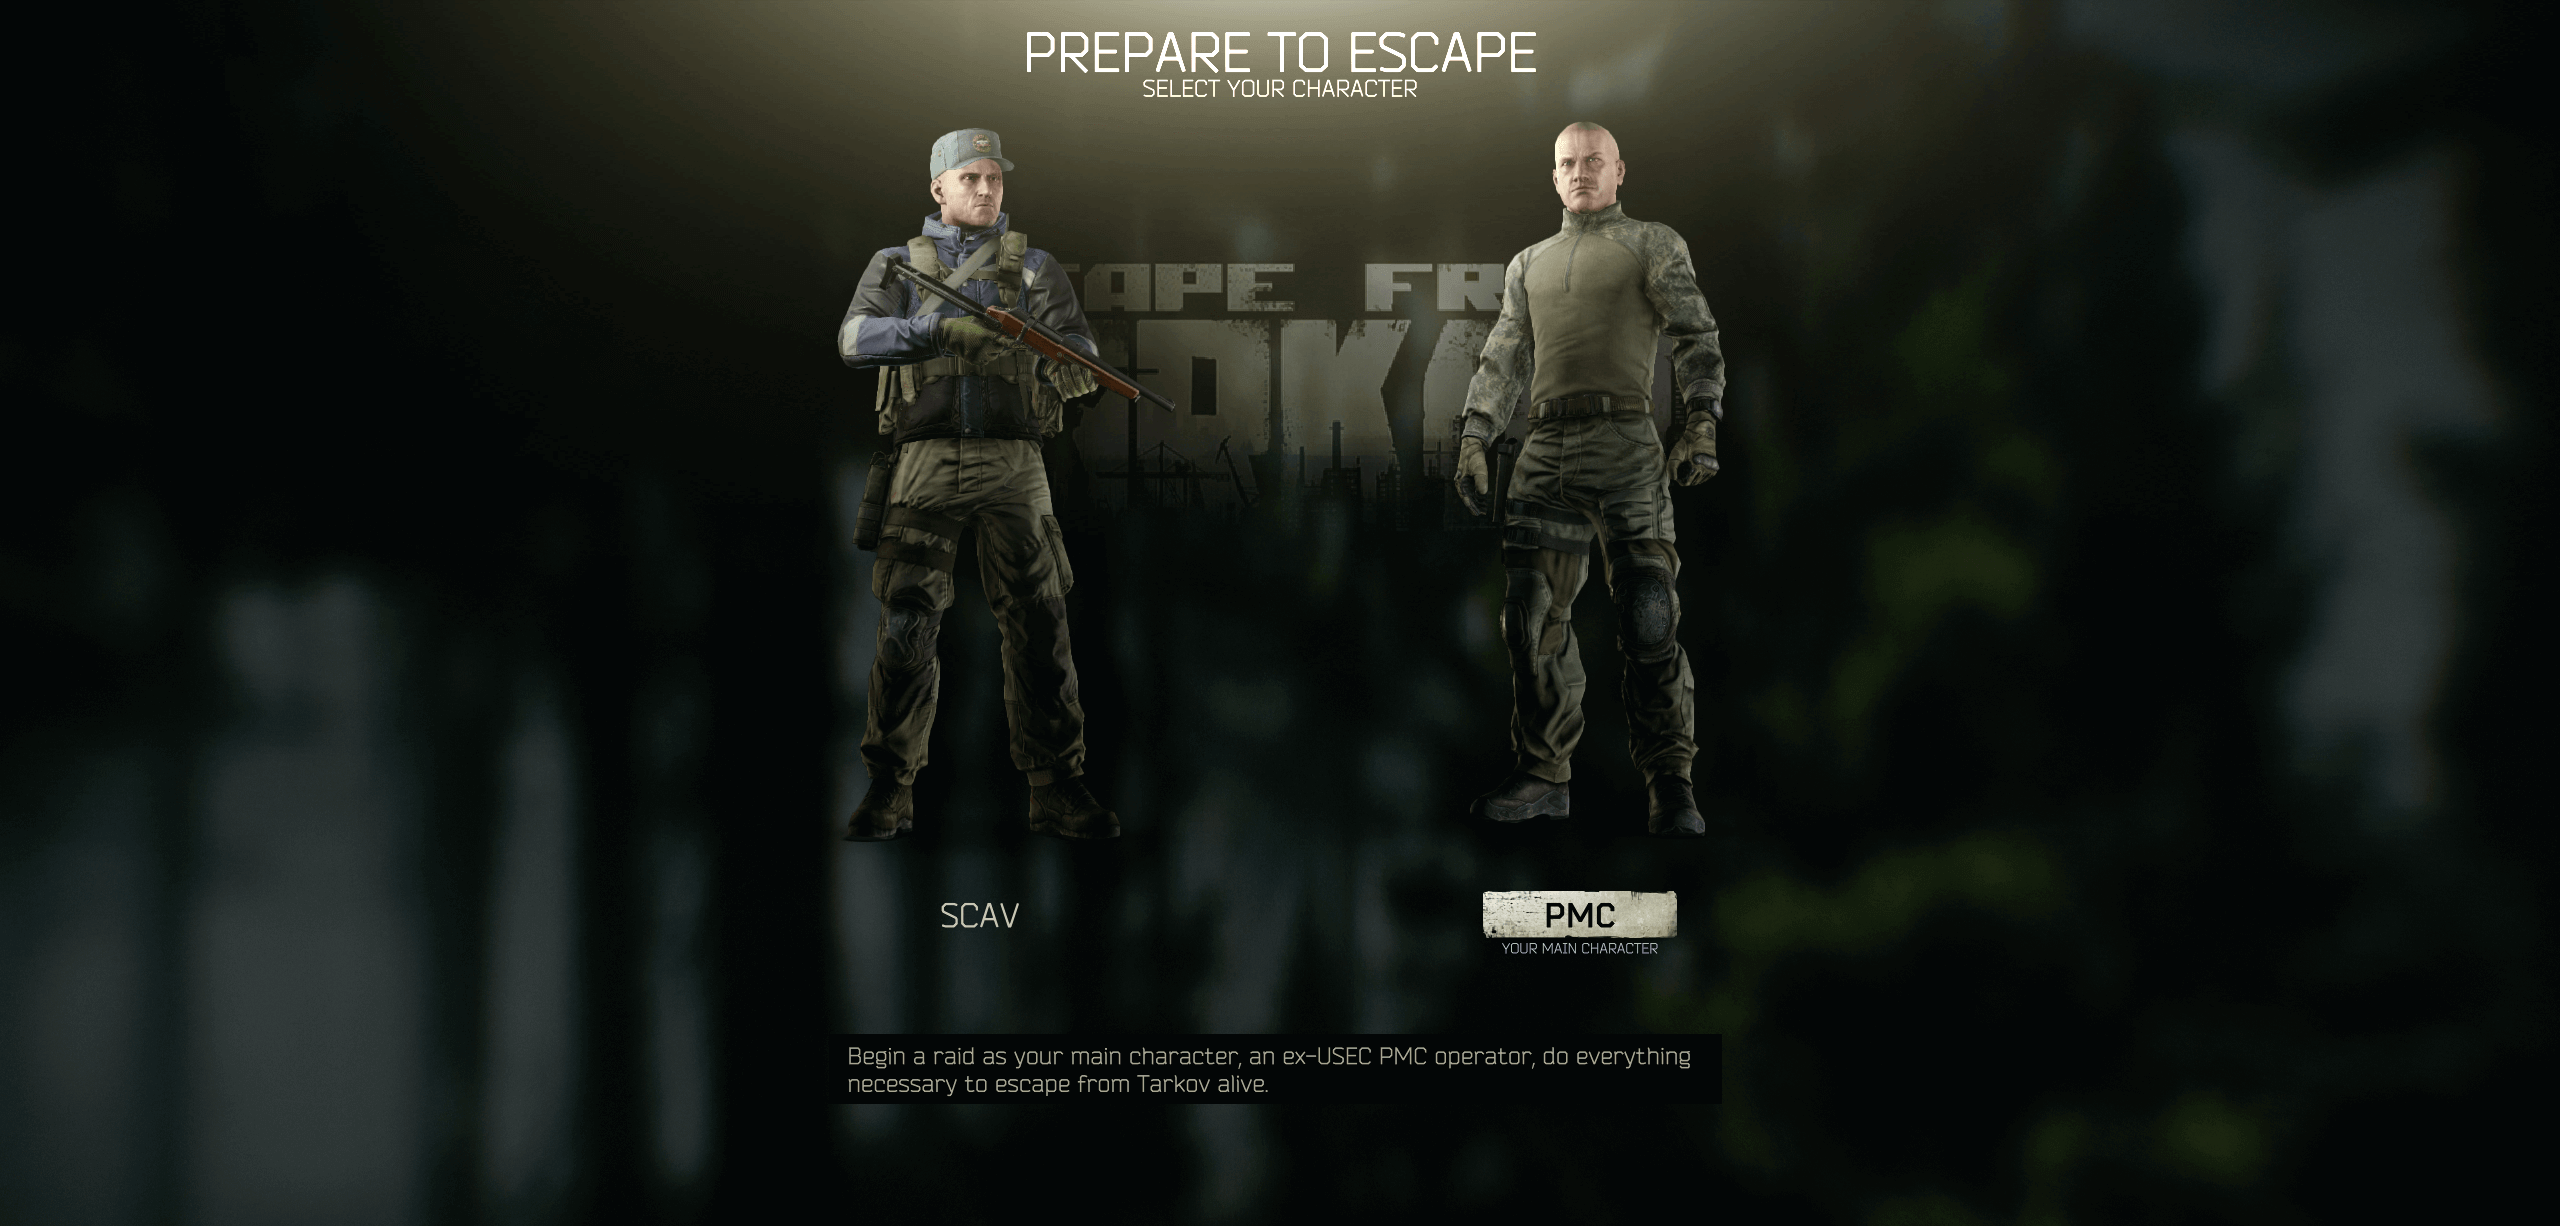 The Escape From Tarkov character selection screen with two different character models: the Scav and PMC